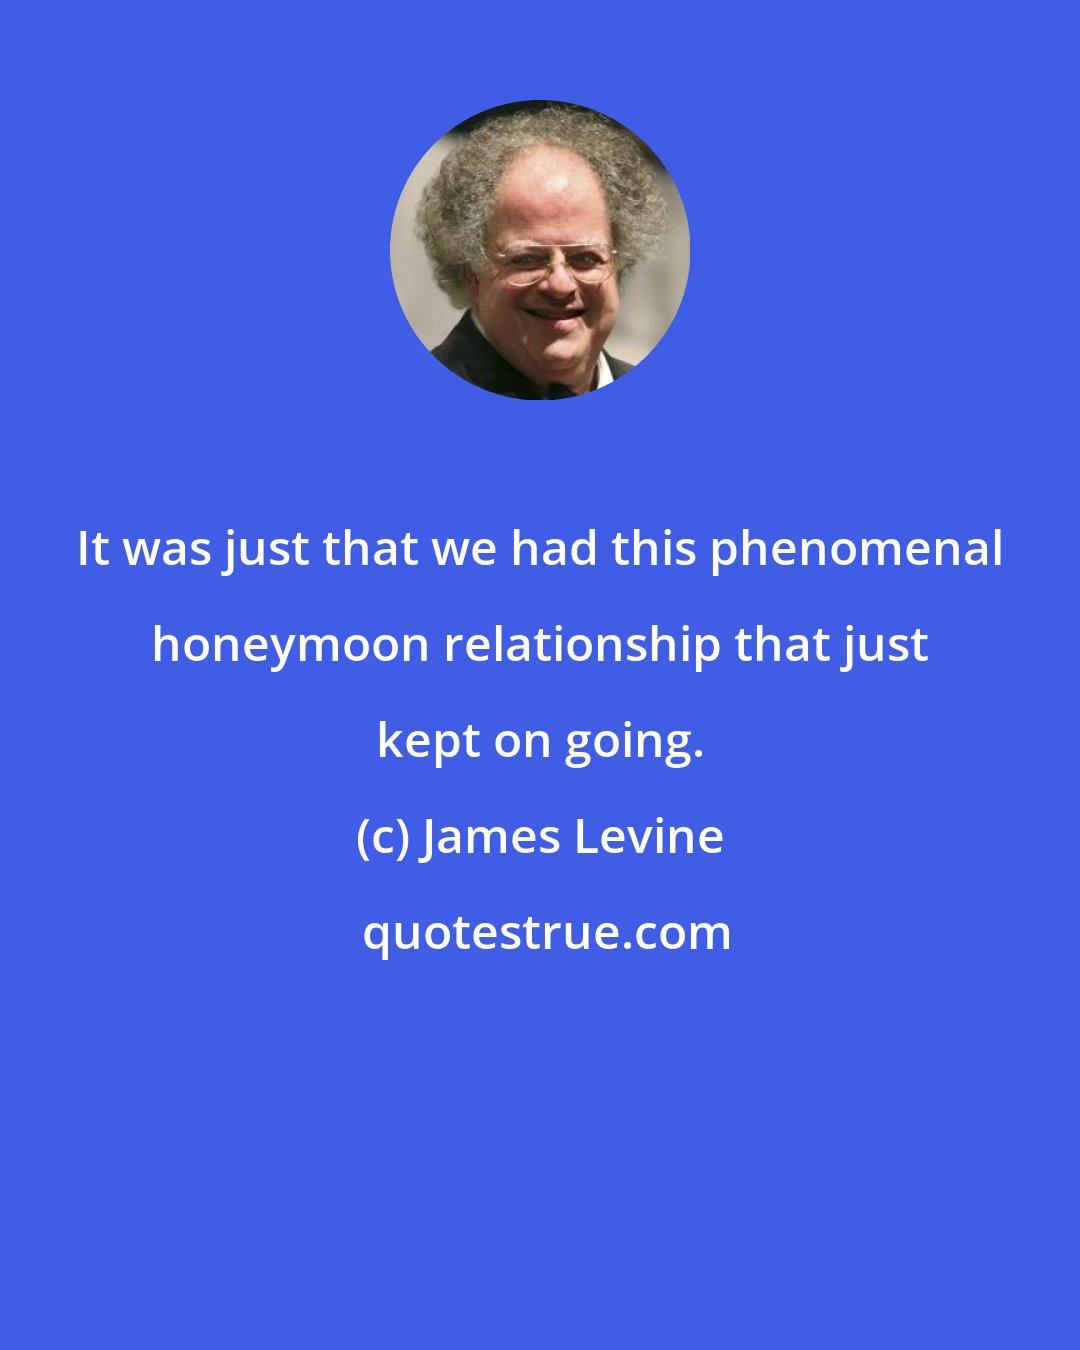 James Levine: It was just that we had this phenomenal honeymoon relationship that just kept on going.